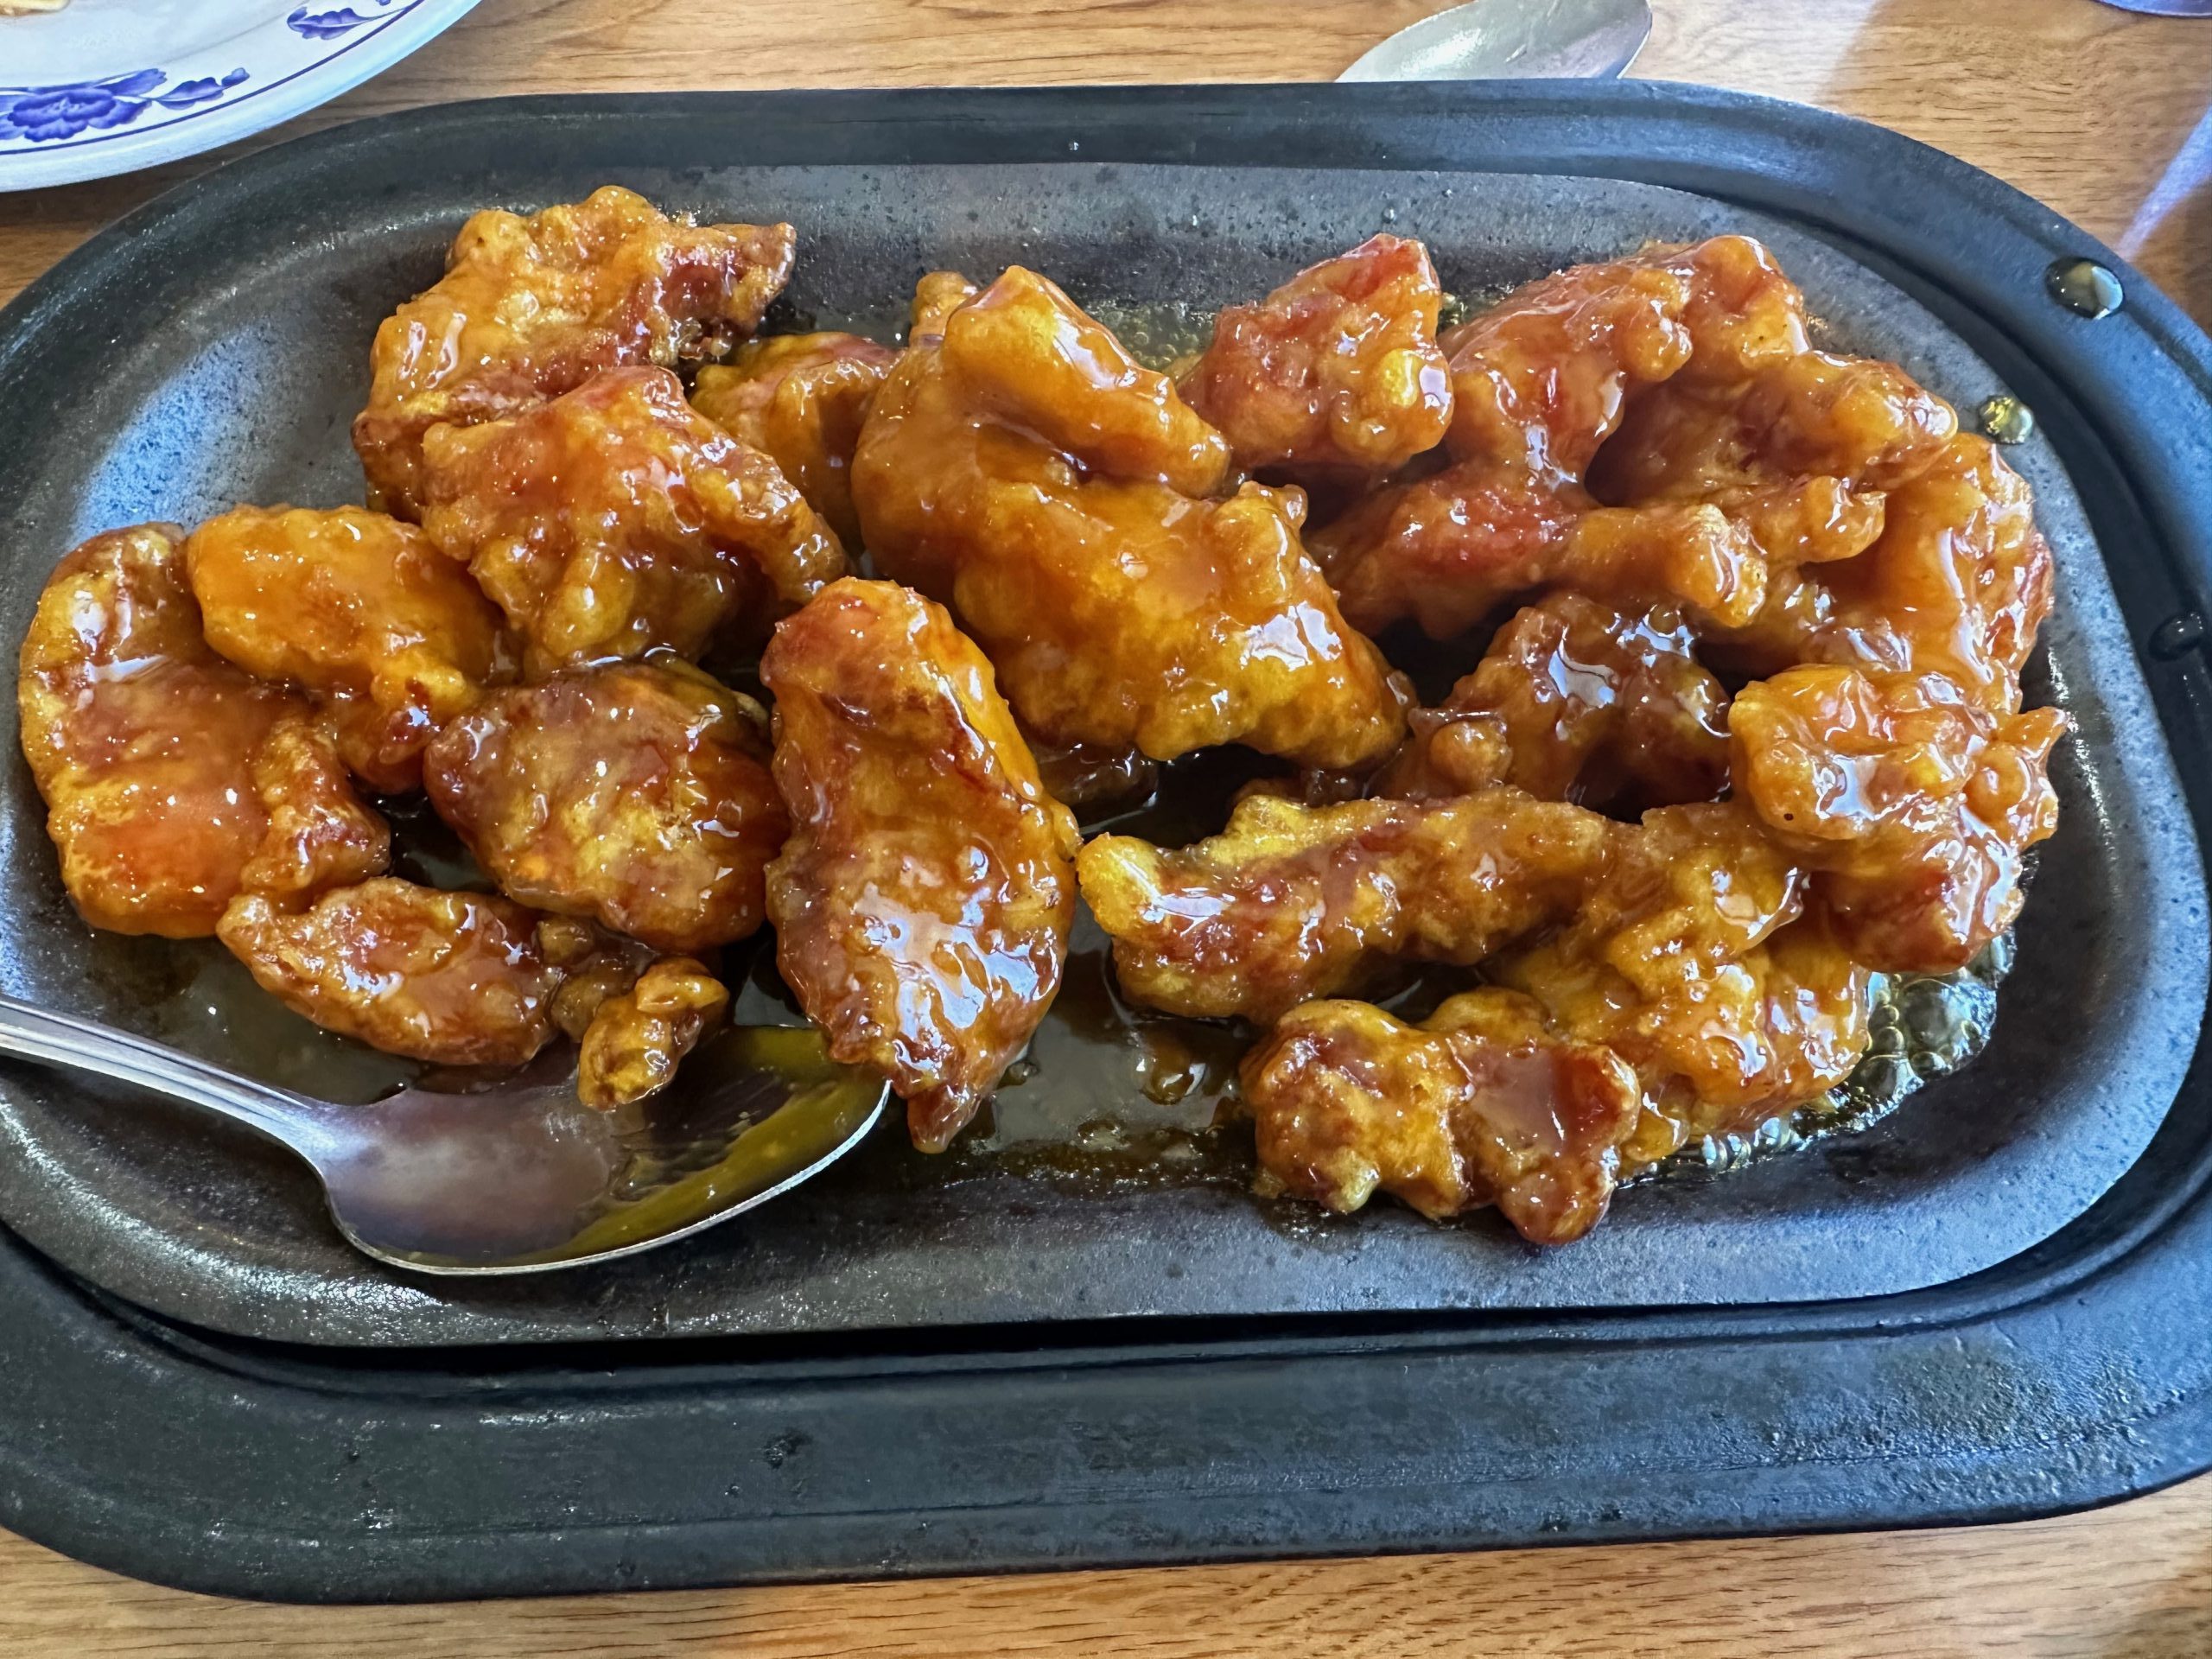 East Ocean Chinese & Seafood – Albuquerque, New Mexico